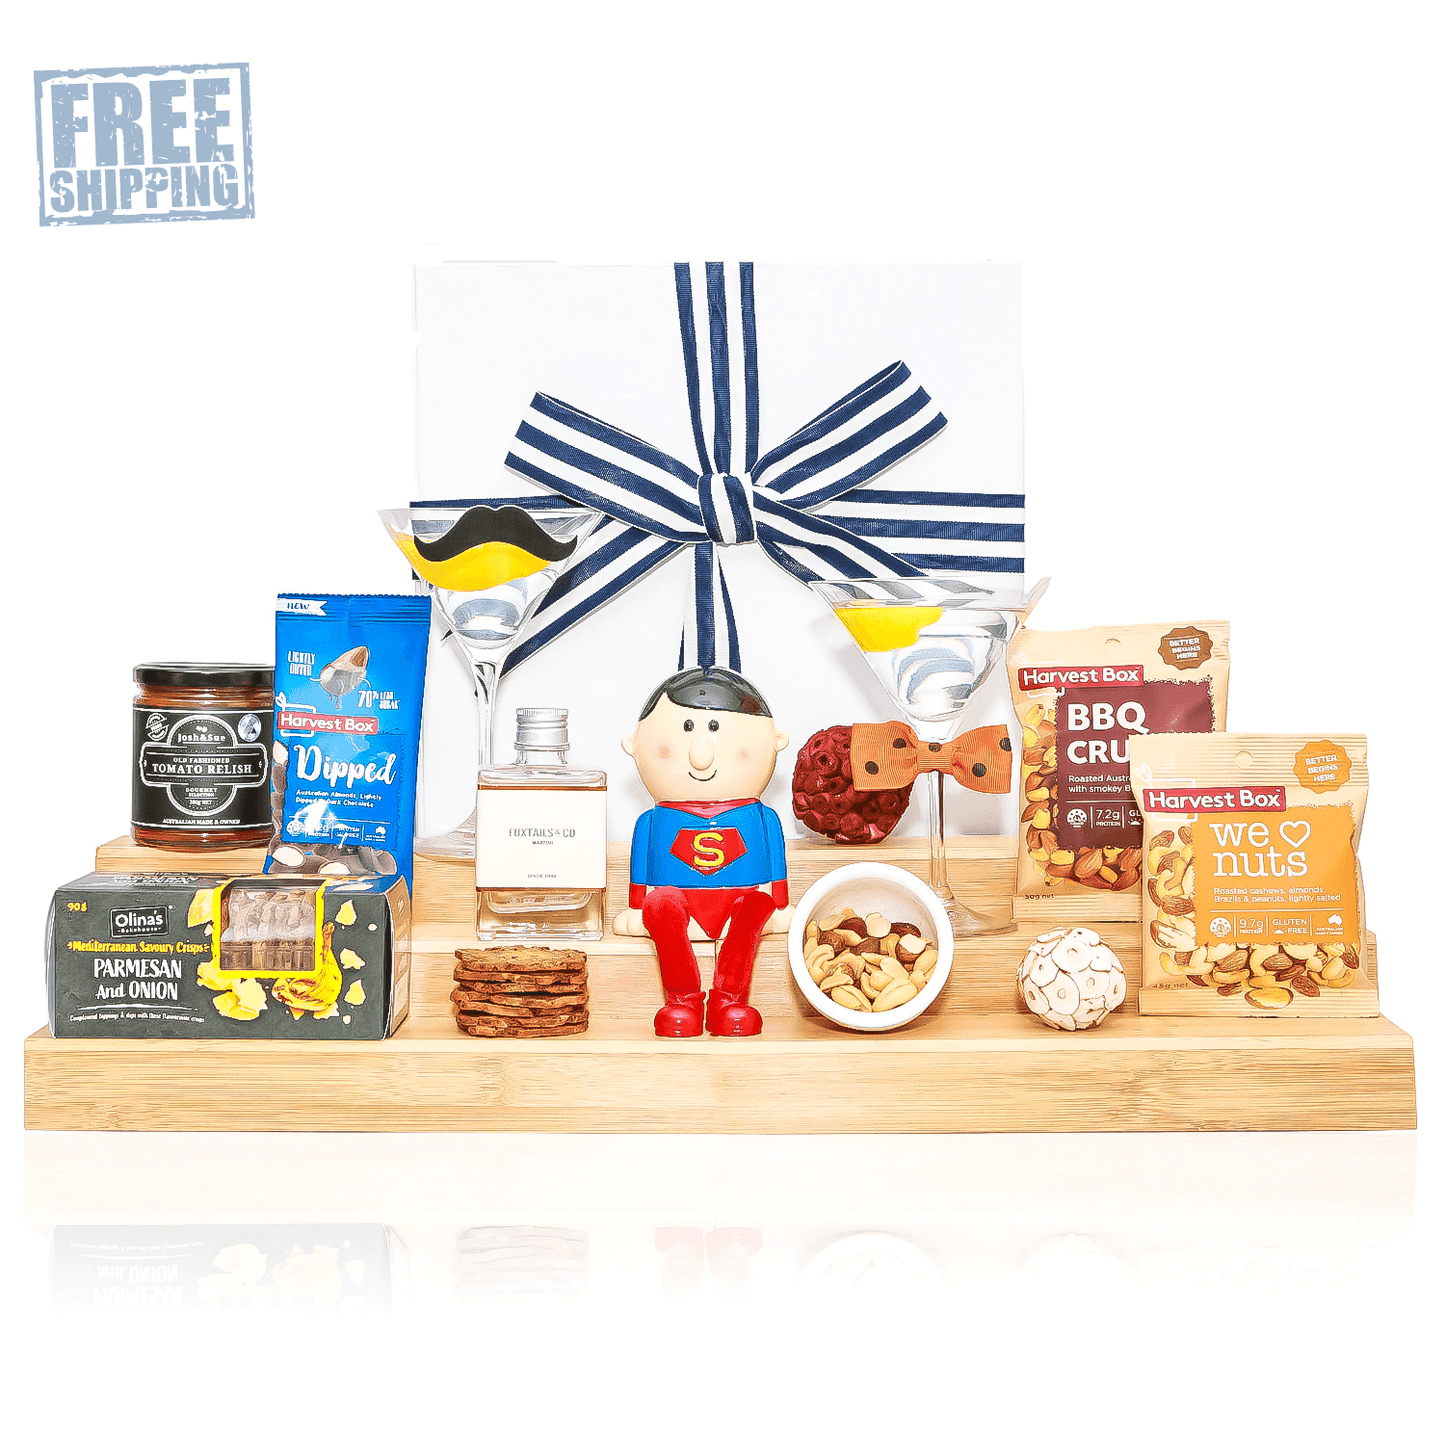 Fathers Day Cocktail Hamper - Healthy Belly Hampers - pure indulgence - birthday hampers - gift hampers - gift hampers melbourne - gift hampers australia - organic hampers -vegan hampers - gluten free hampers - birthday hampers -anniversary hampers - wedding hampers - alcohol hampers